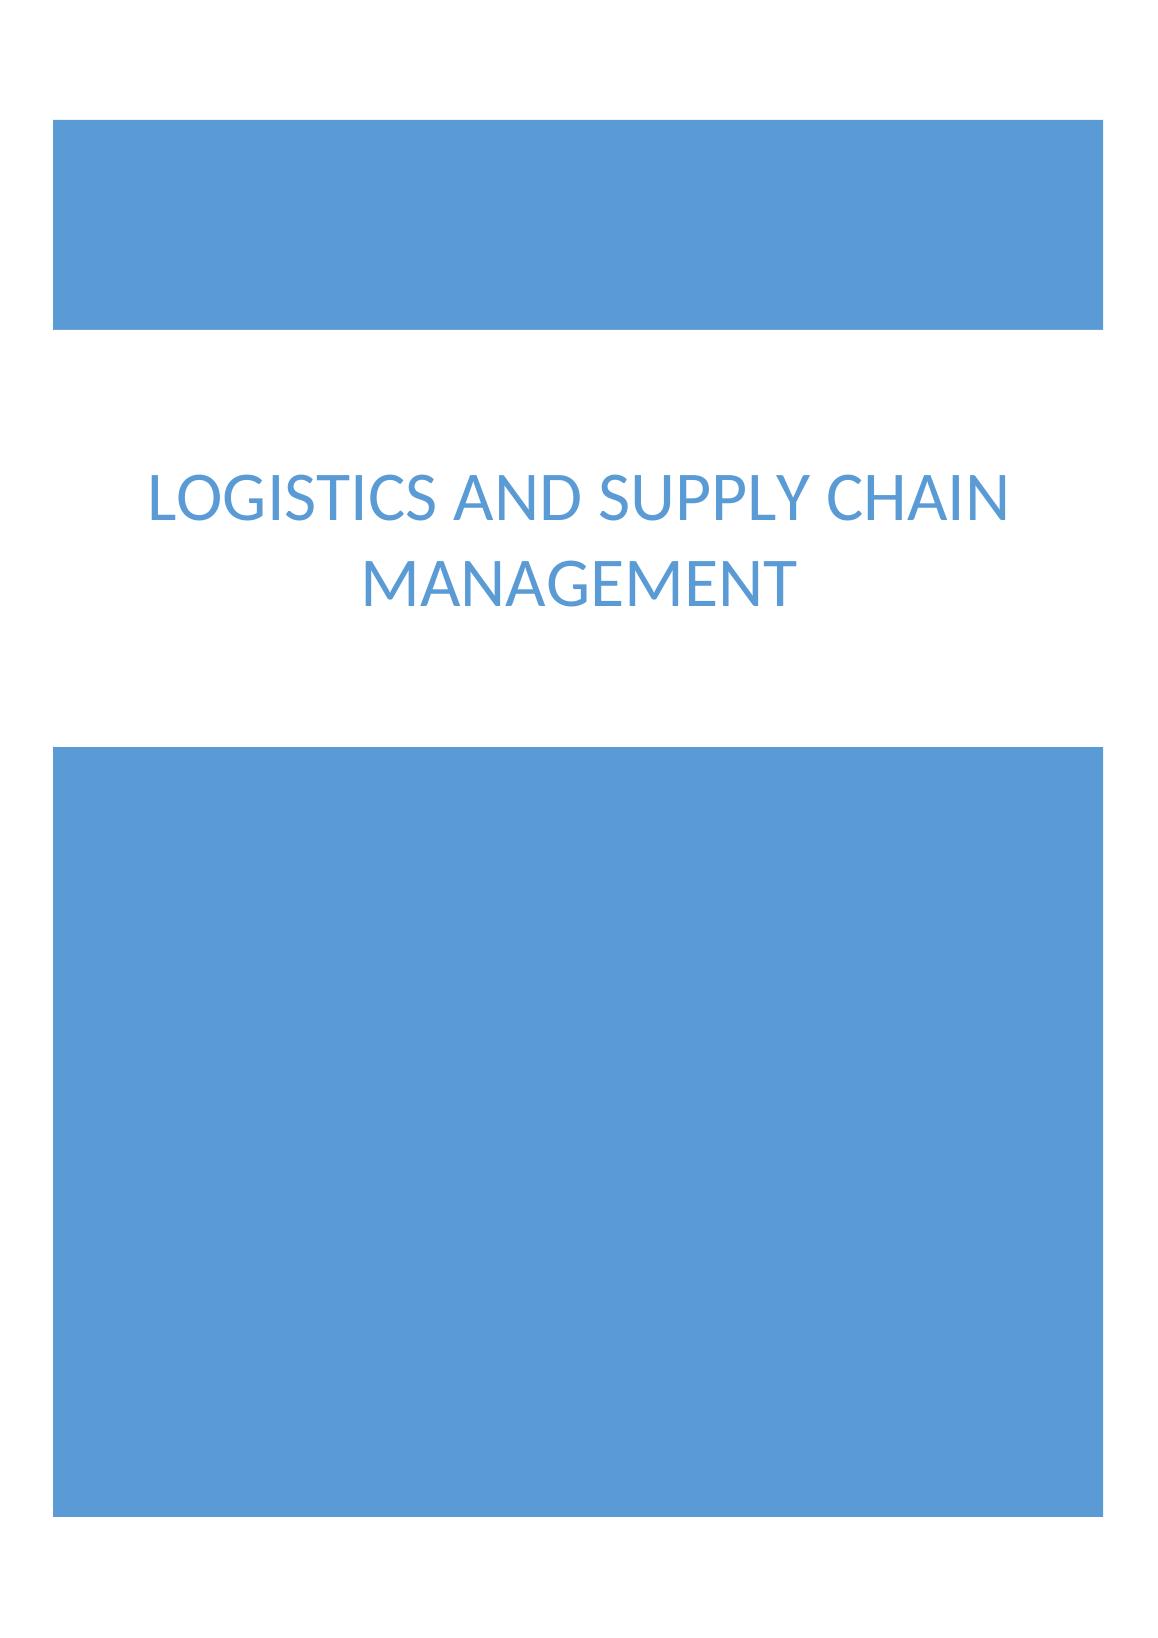 LSCM5027  Logistics and  Supply Chain Management Assignment_1